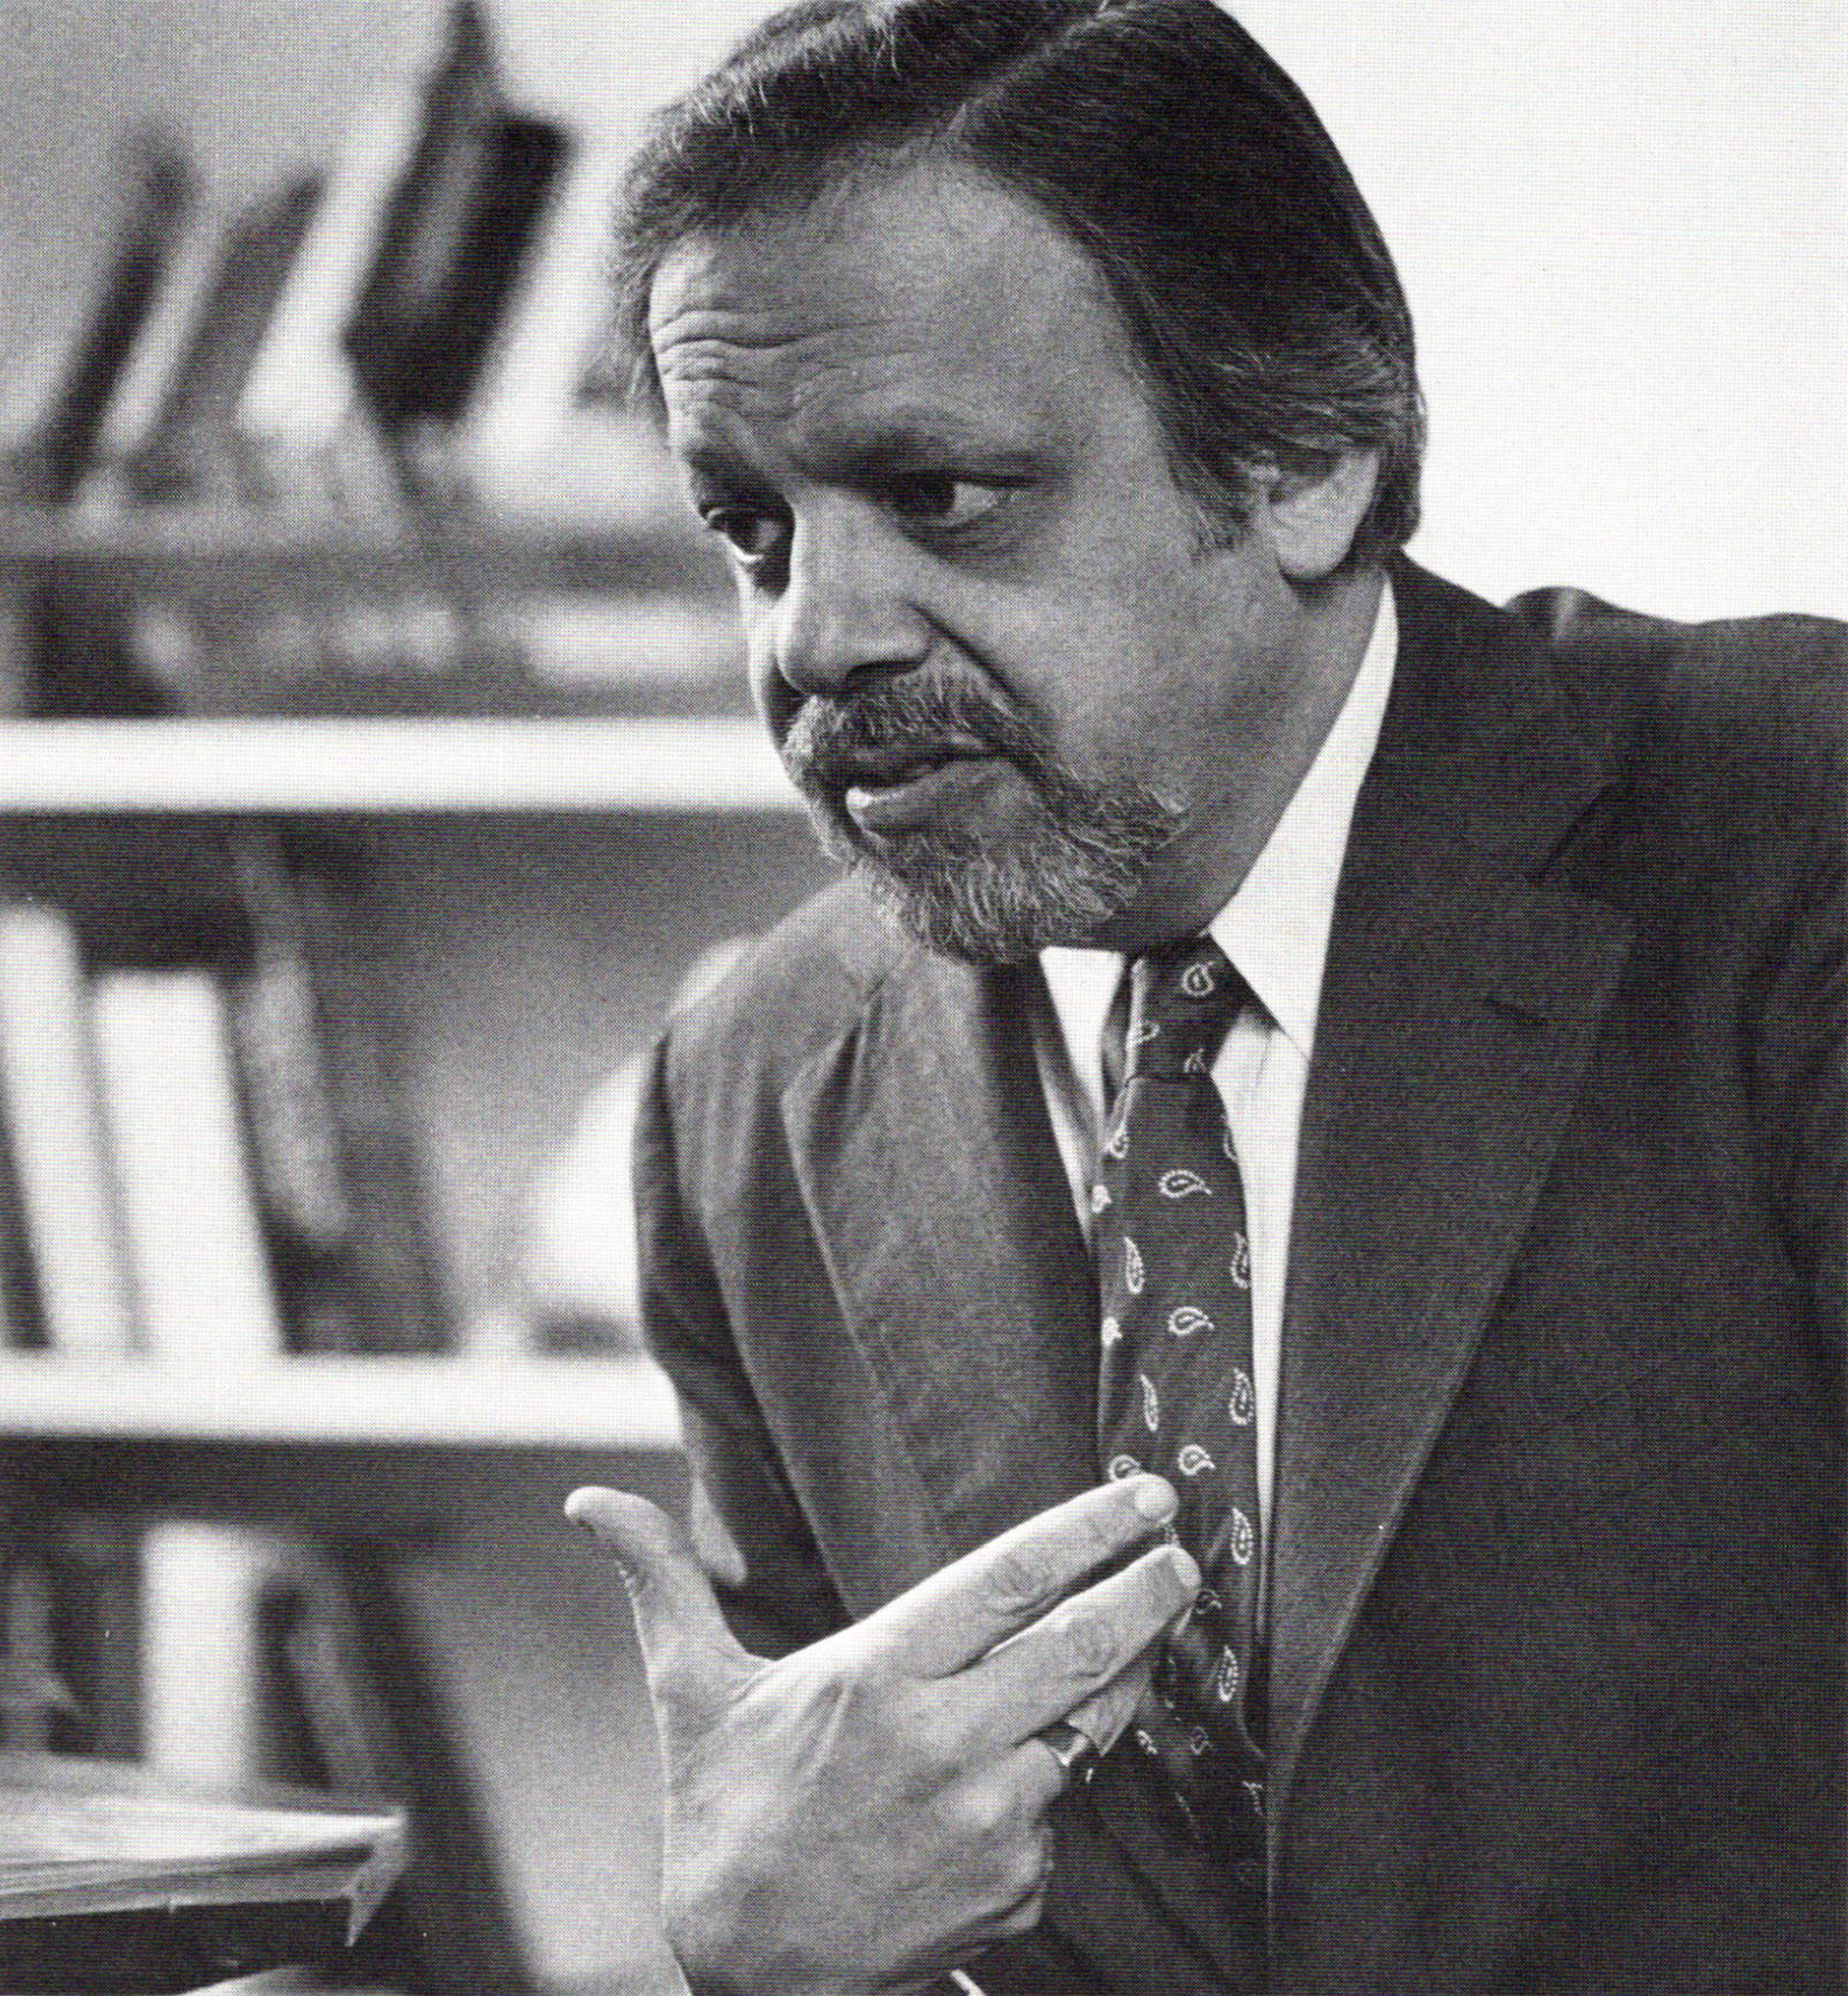 Black and white photo of A. Bartlett Giamatti pointing at himself while speaking in his office